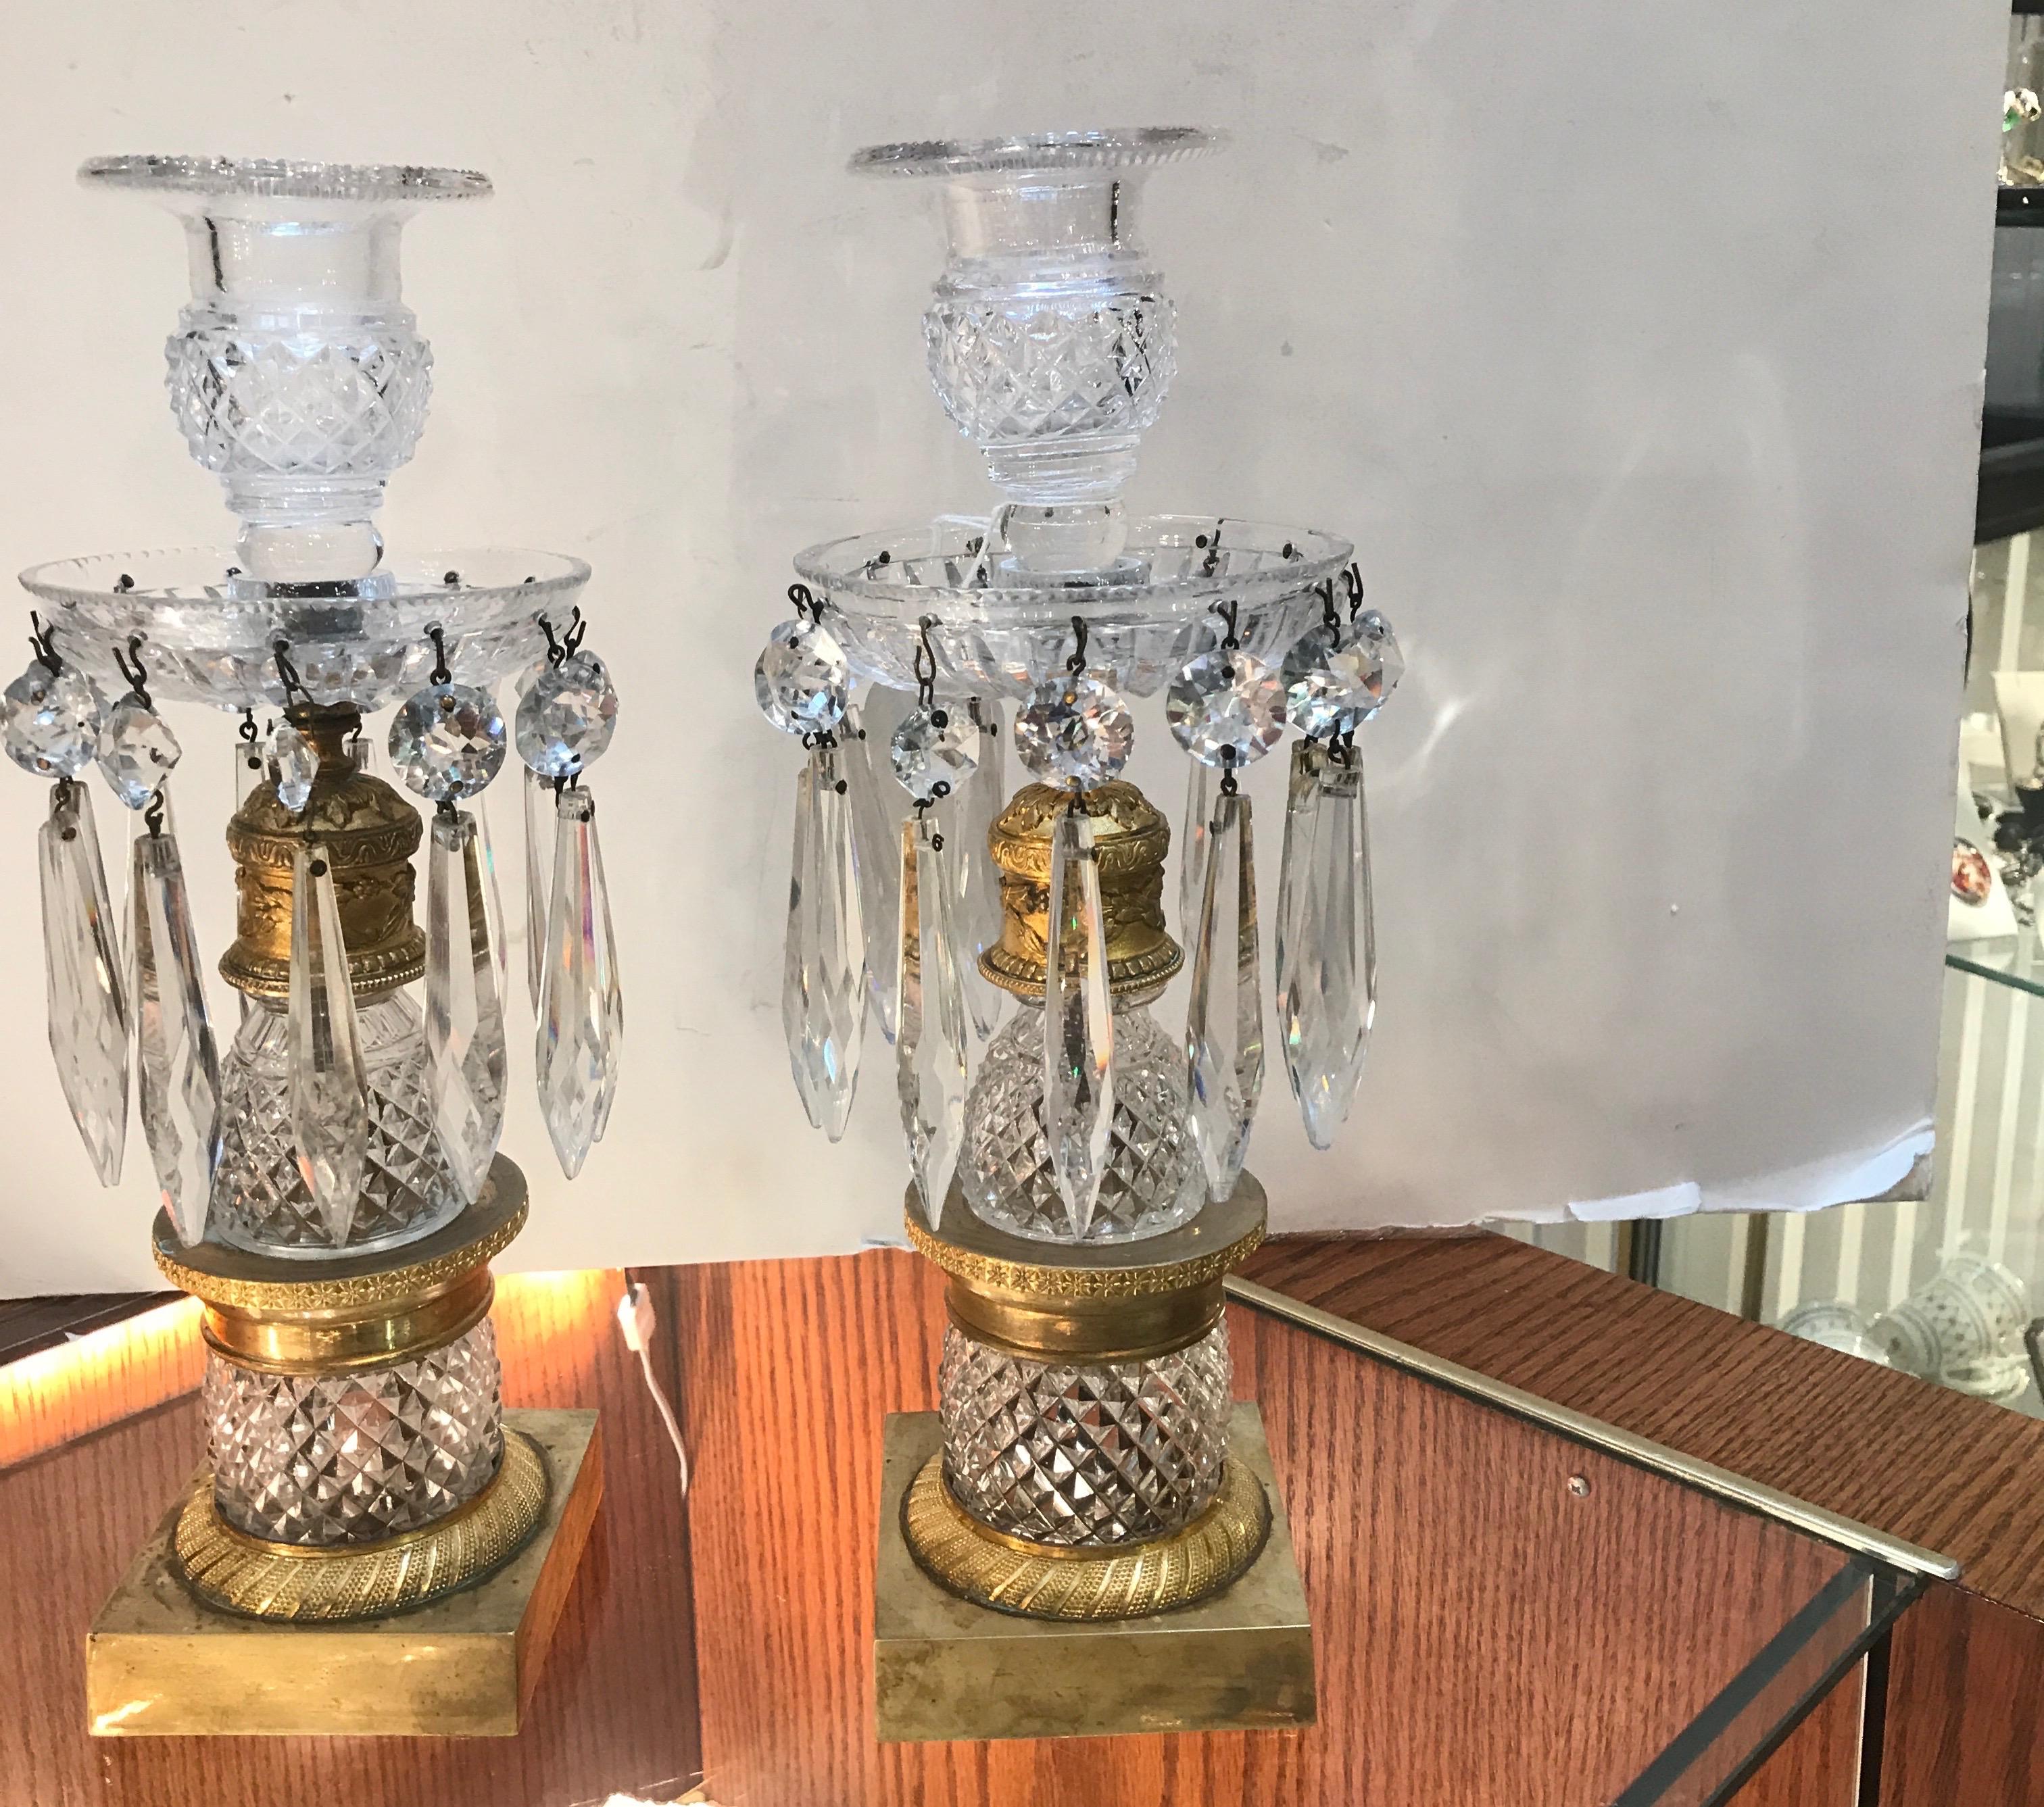 Elegant pair of French mid-19th century cut glass and gilt bronze luster candlesticks. The cut glass is attributed to Baccarat with cast and gilt bronze mounts and square base. 11.5 inches tall, 4.5 inches in diameter, the bases are 3.25 inches